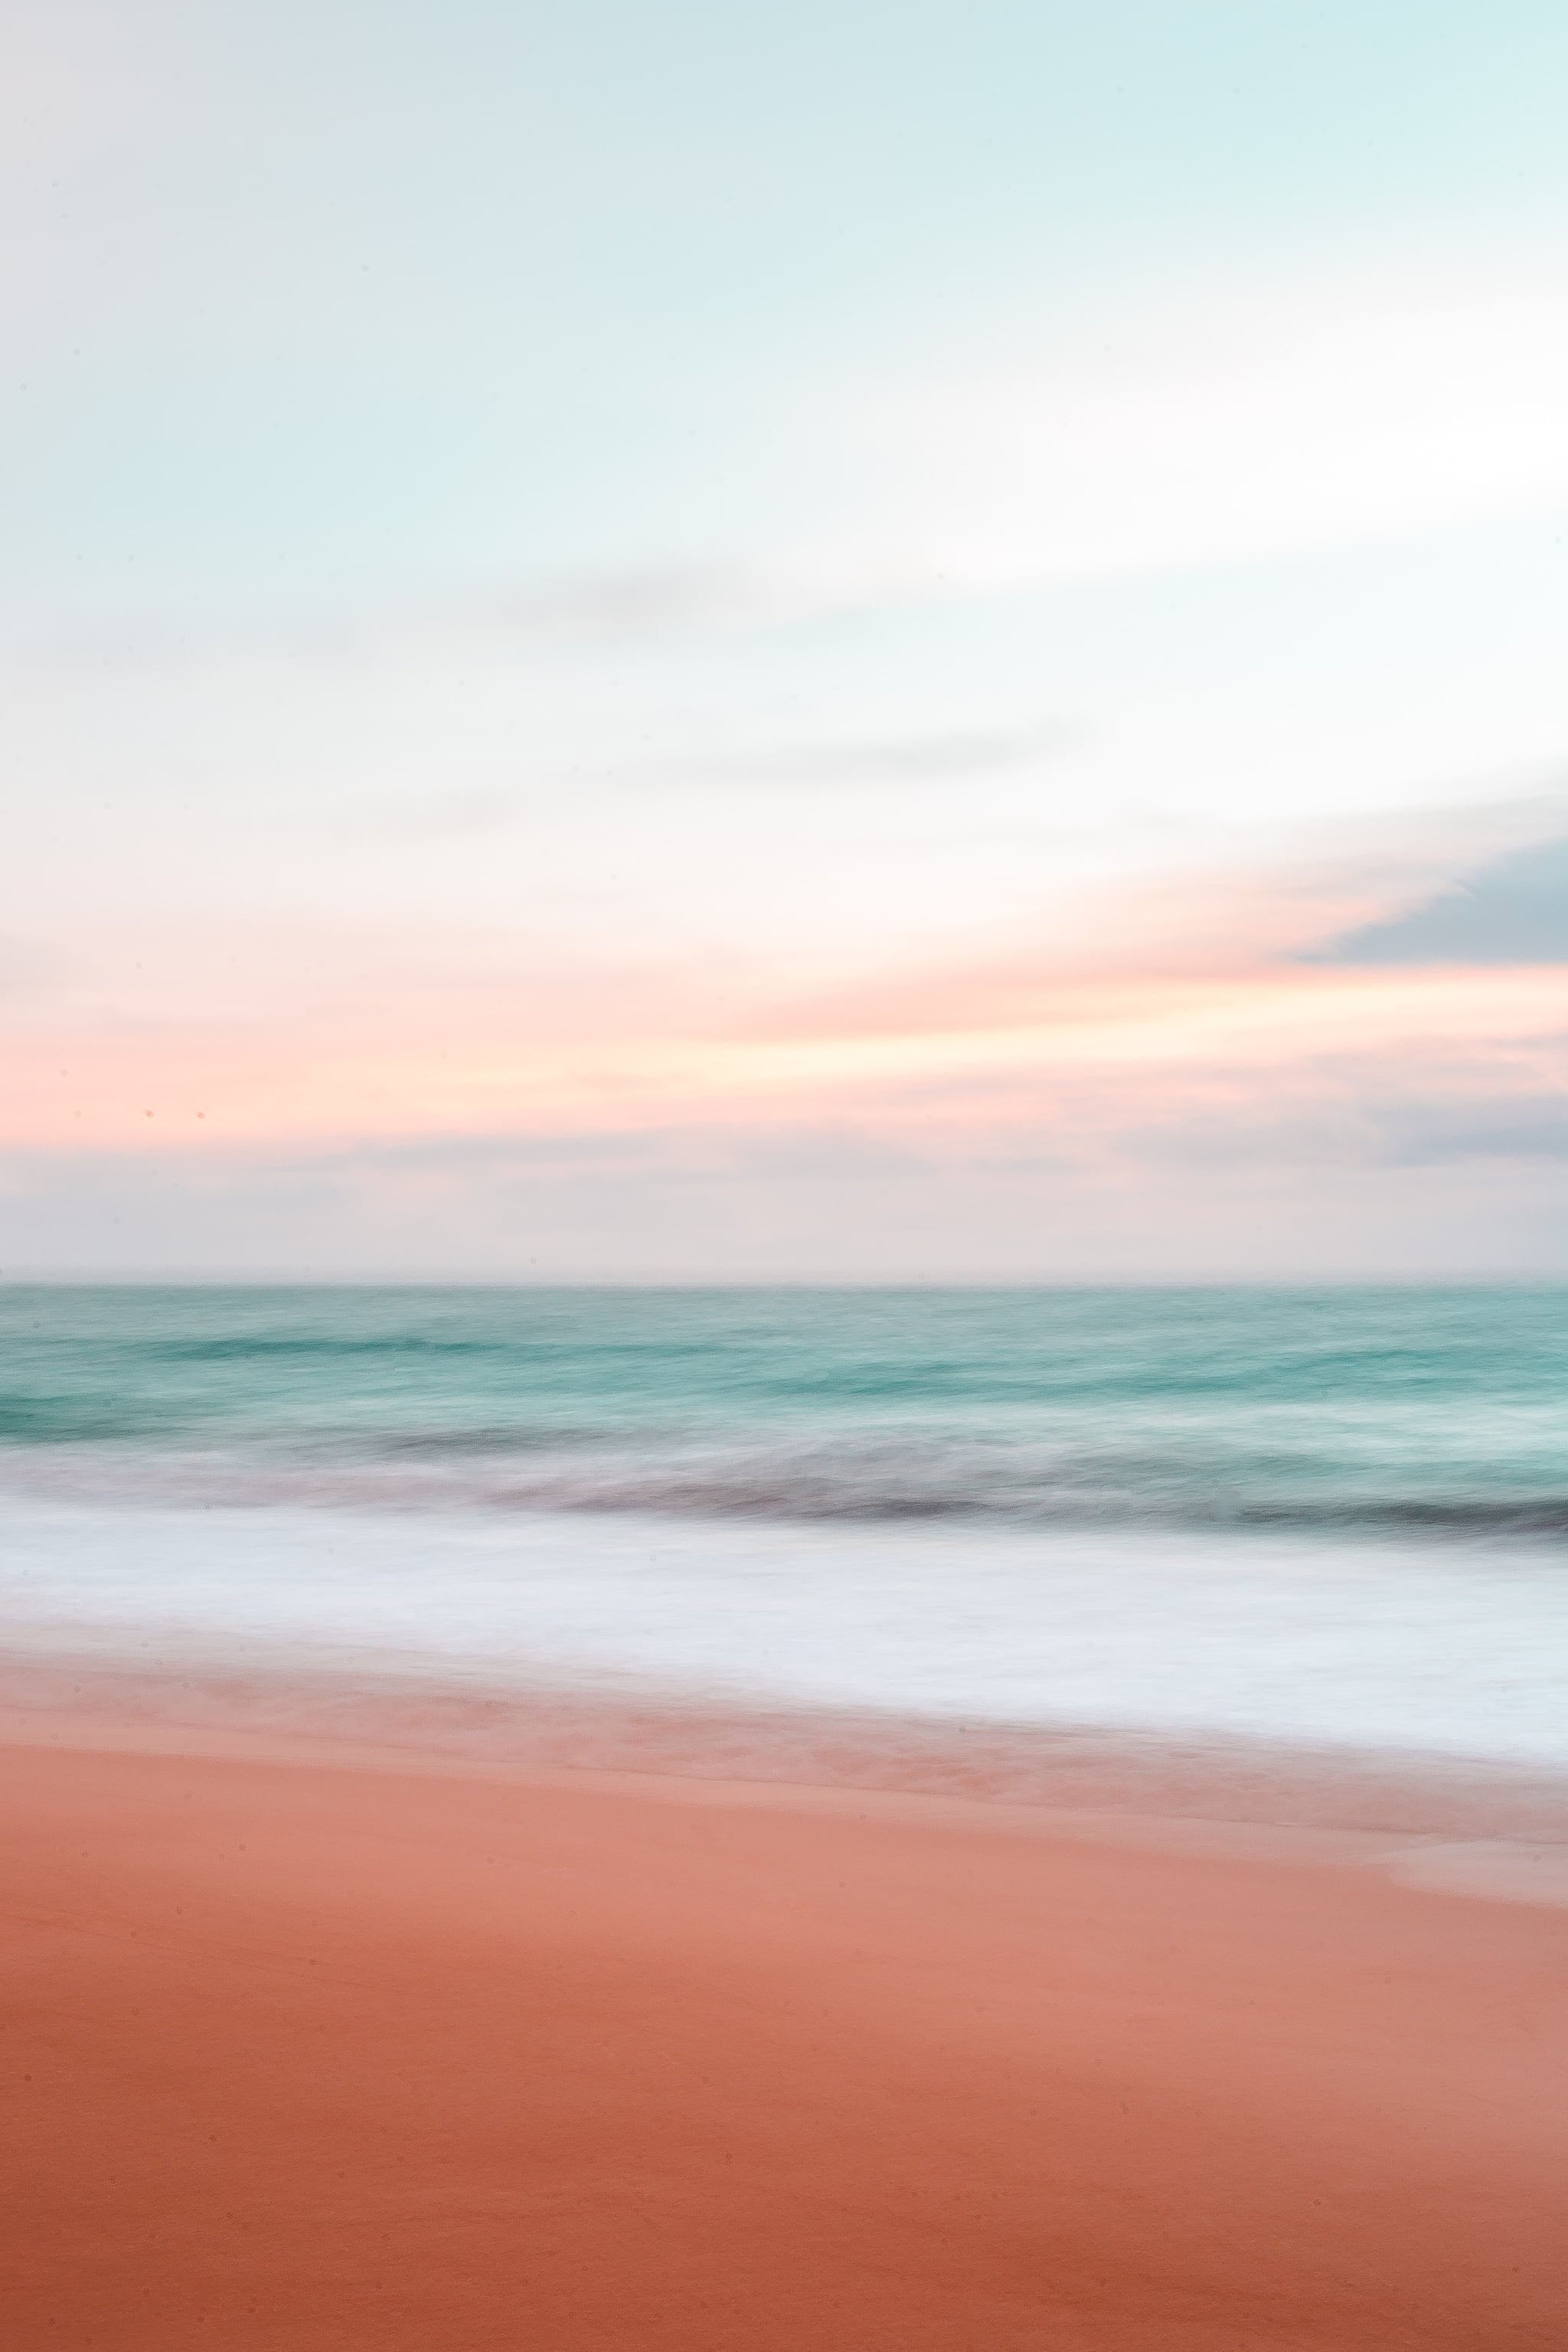 A photo of a beach with a pastel sky - Beach, water, wave